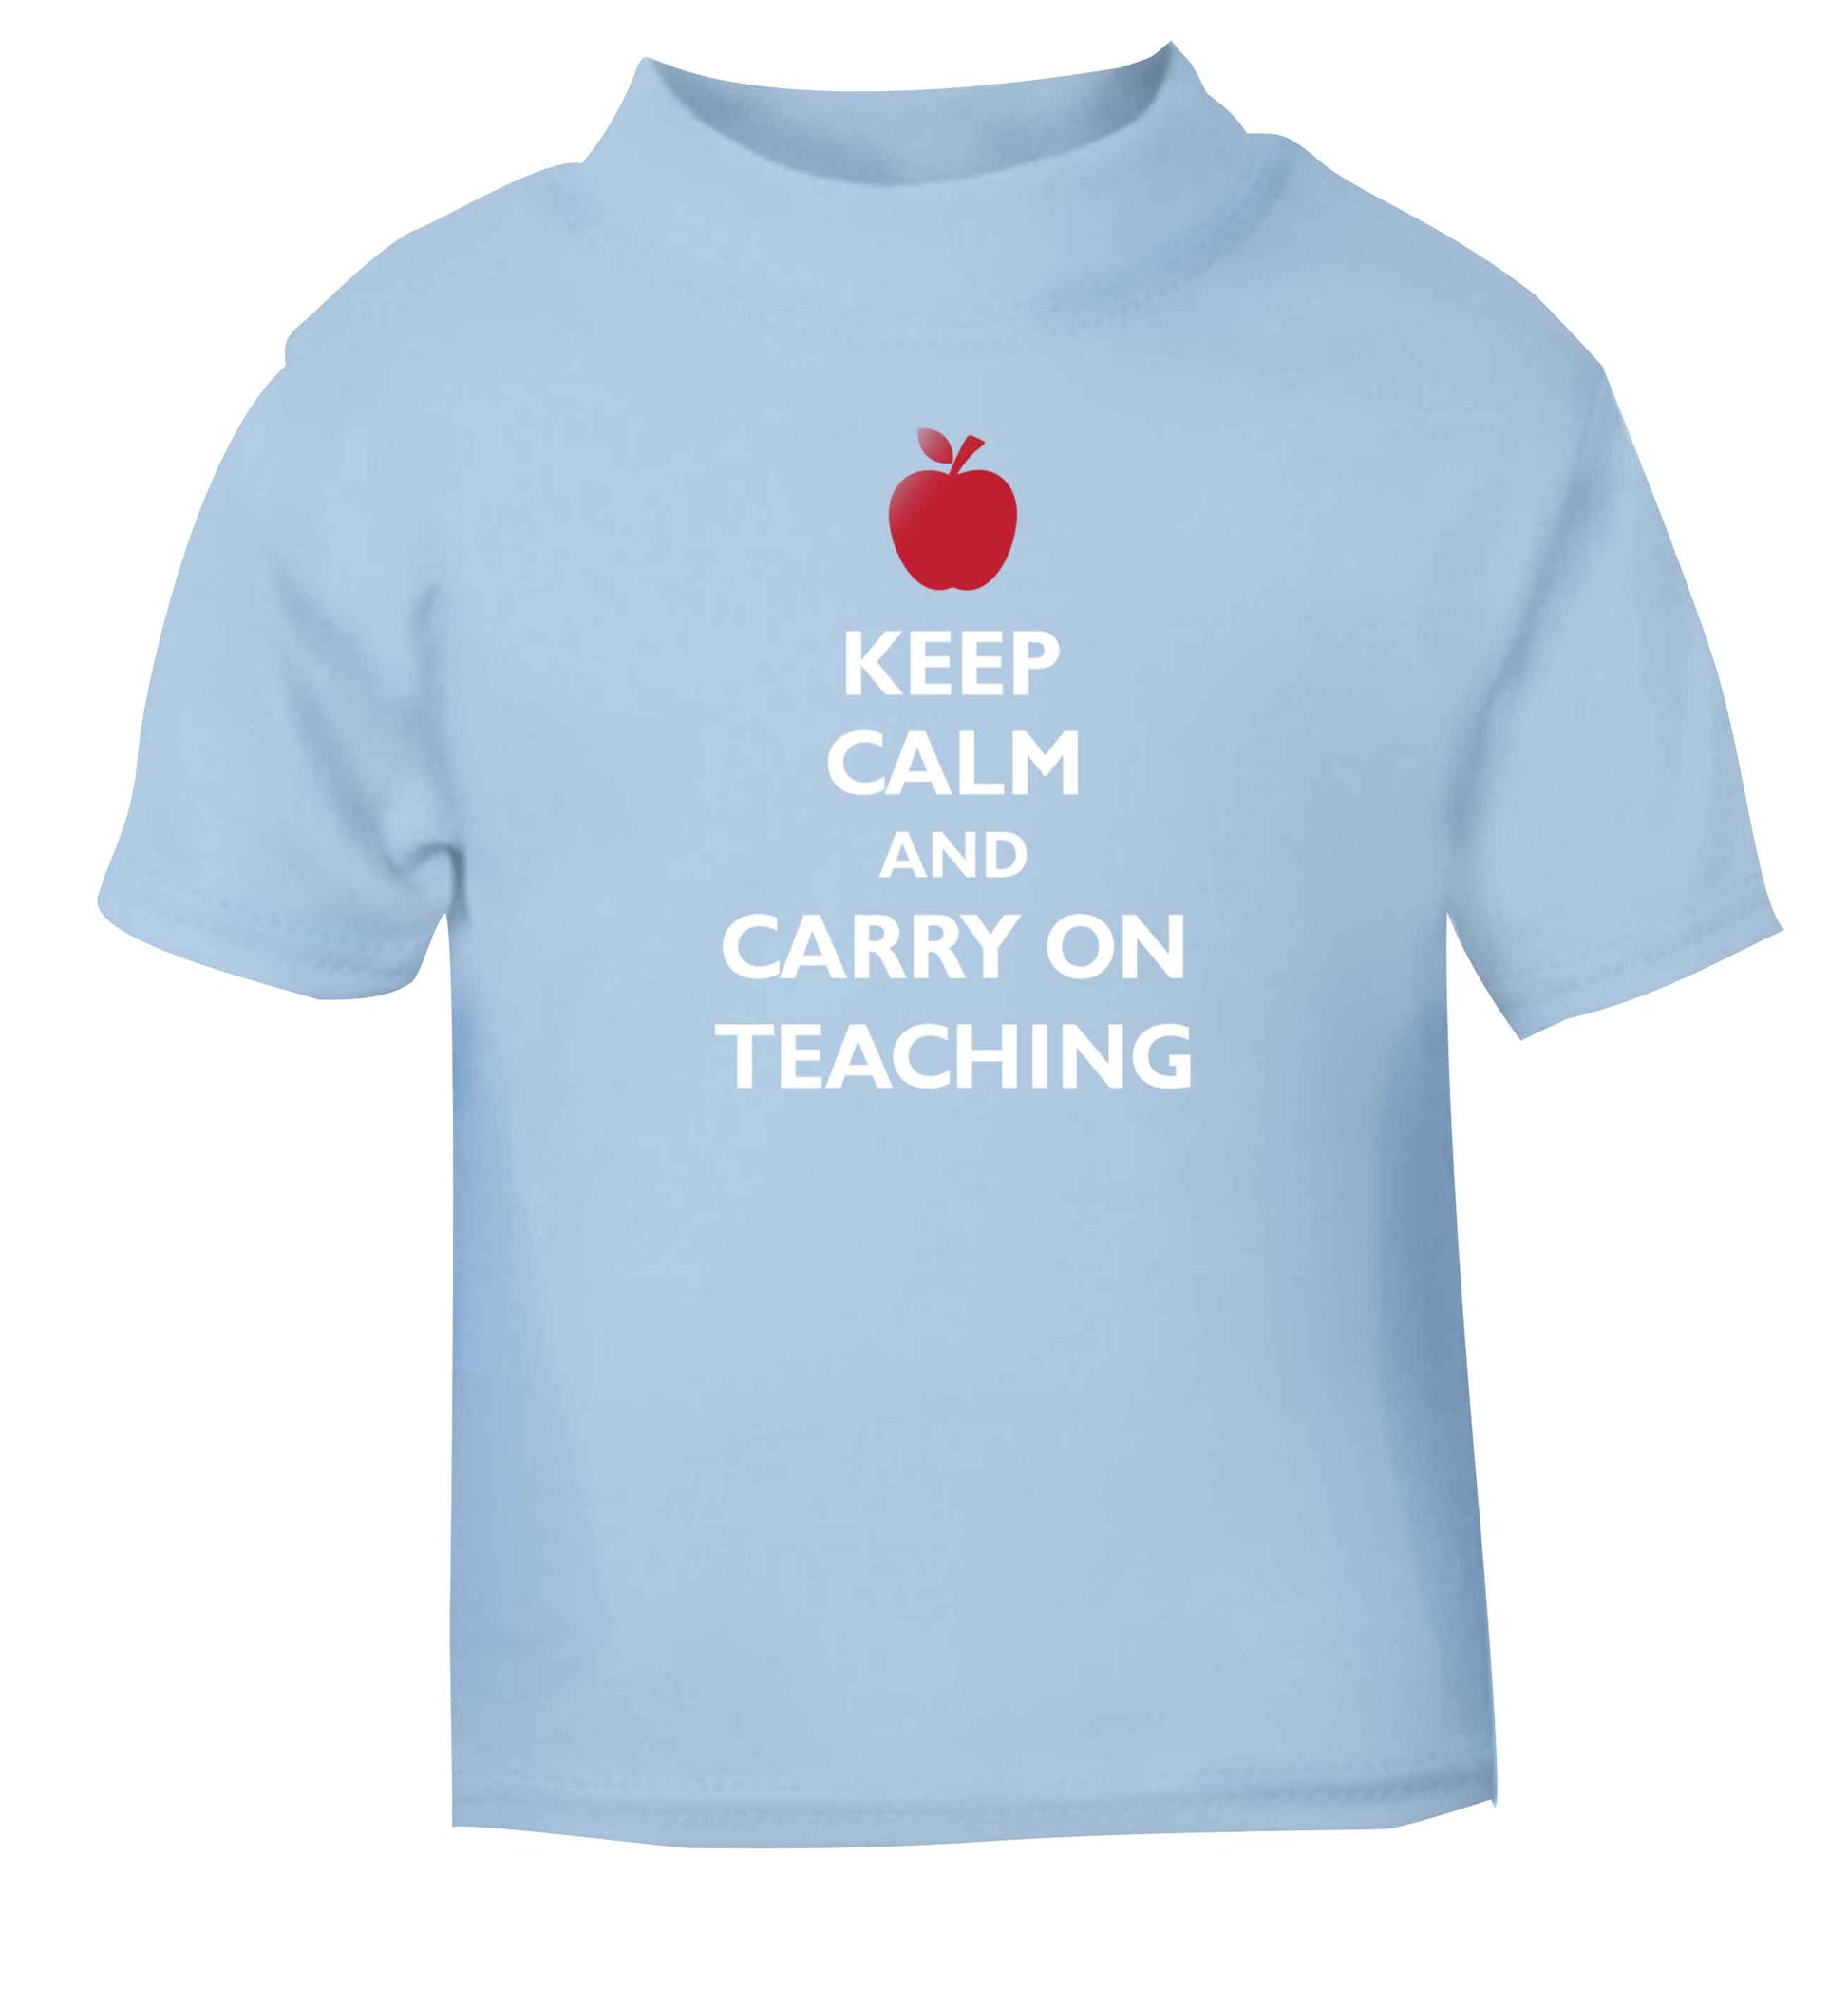 Keep calm and carry on teaching light blue baby toddler Tshirt 2 Years